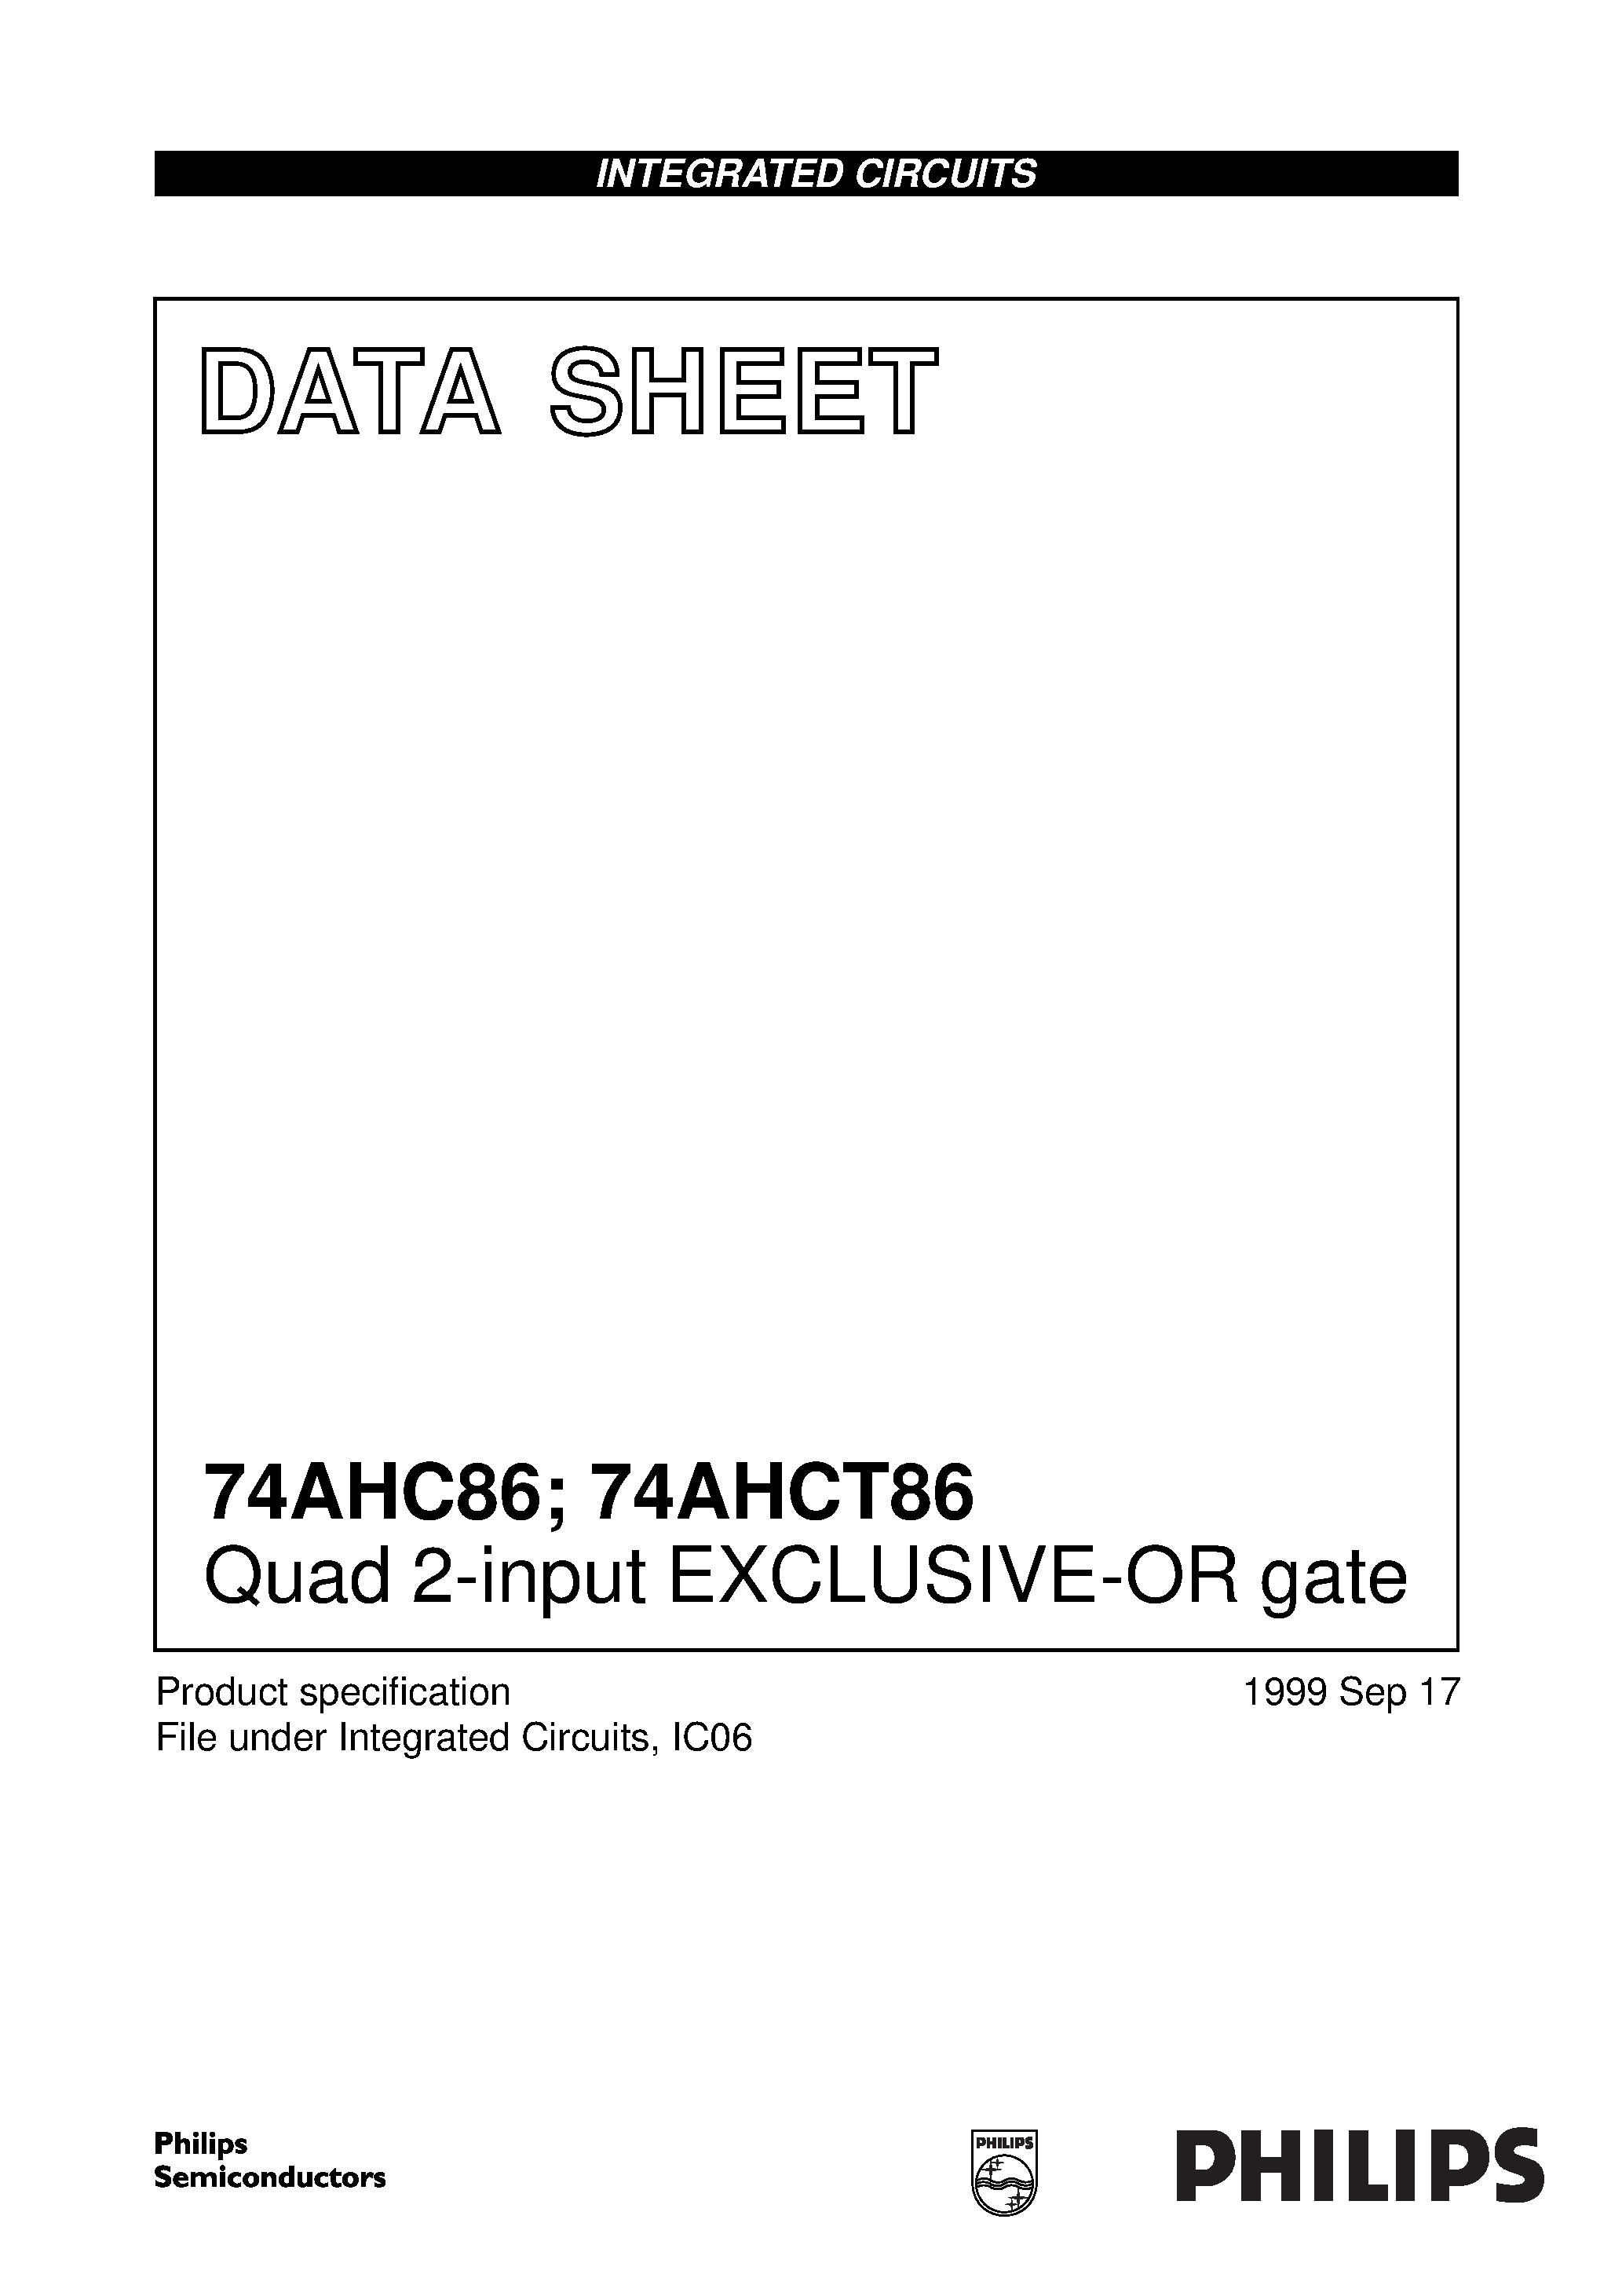 Datasheet 74AHCT86PWDH - Quad 2-input EXCLUSIVE-OR gate page 1